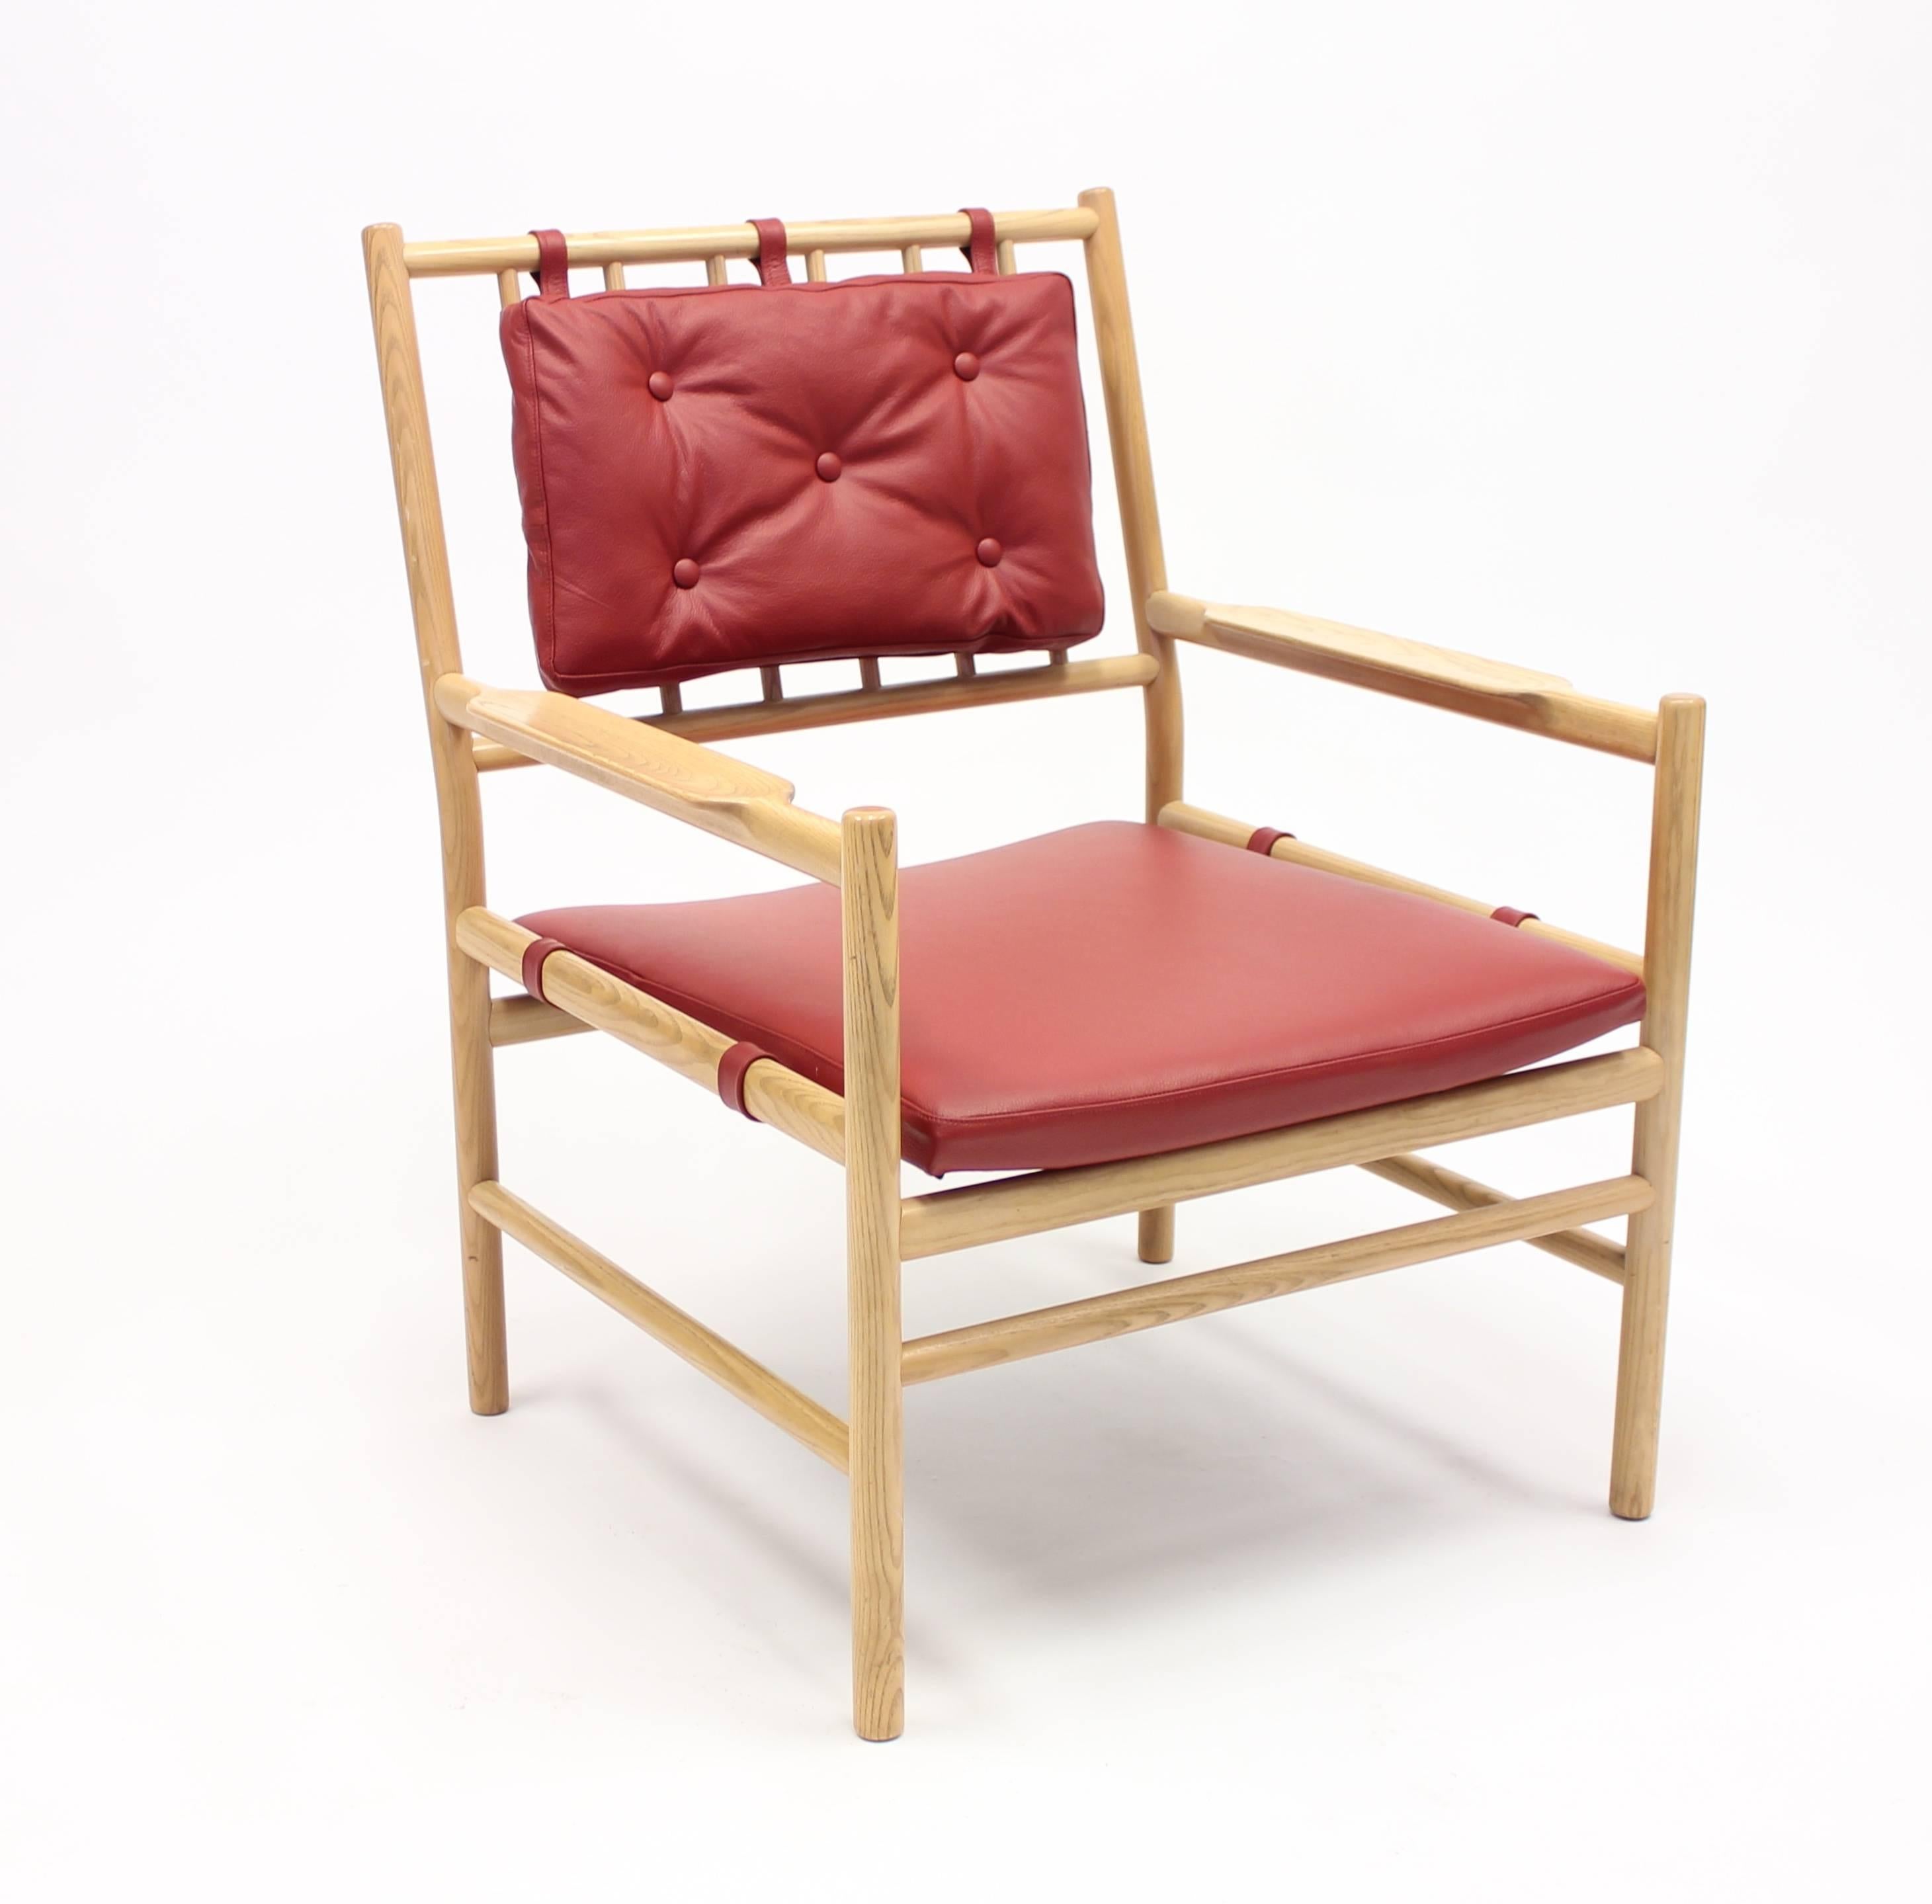 A 1970s Scandinavian midcentury safari style oak easy chair designed by Arne Norell for his own company Arne Norell AB with newly upholstered red leather seat and back cushion. A typical Swedish design, very light in appearance due to the very thin